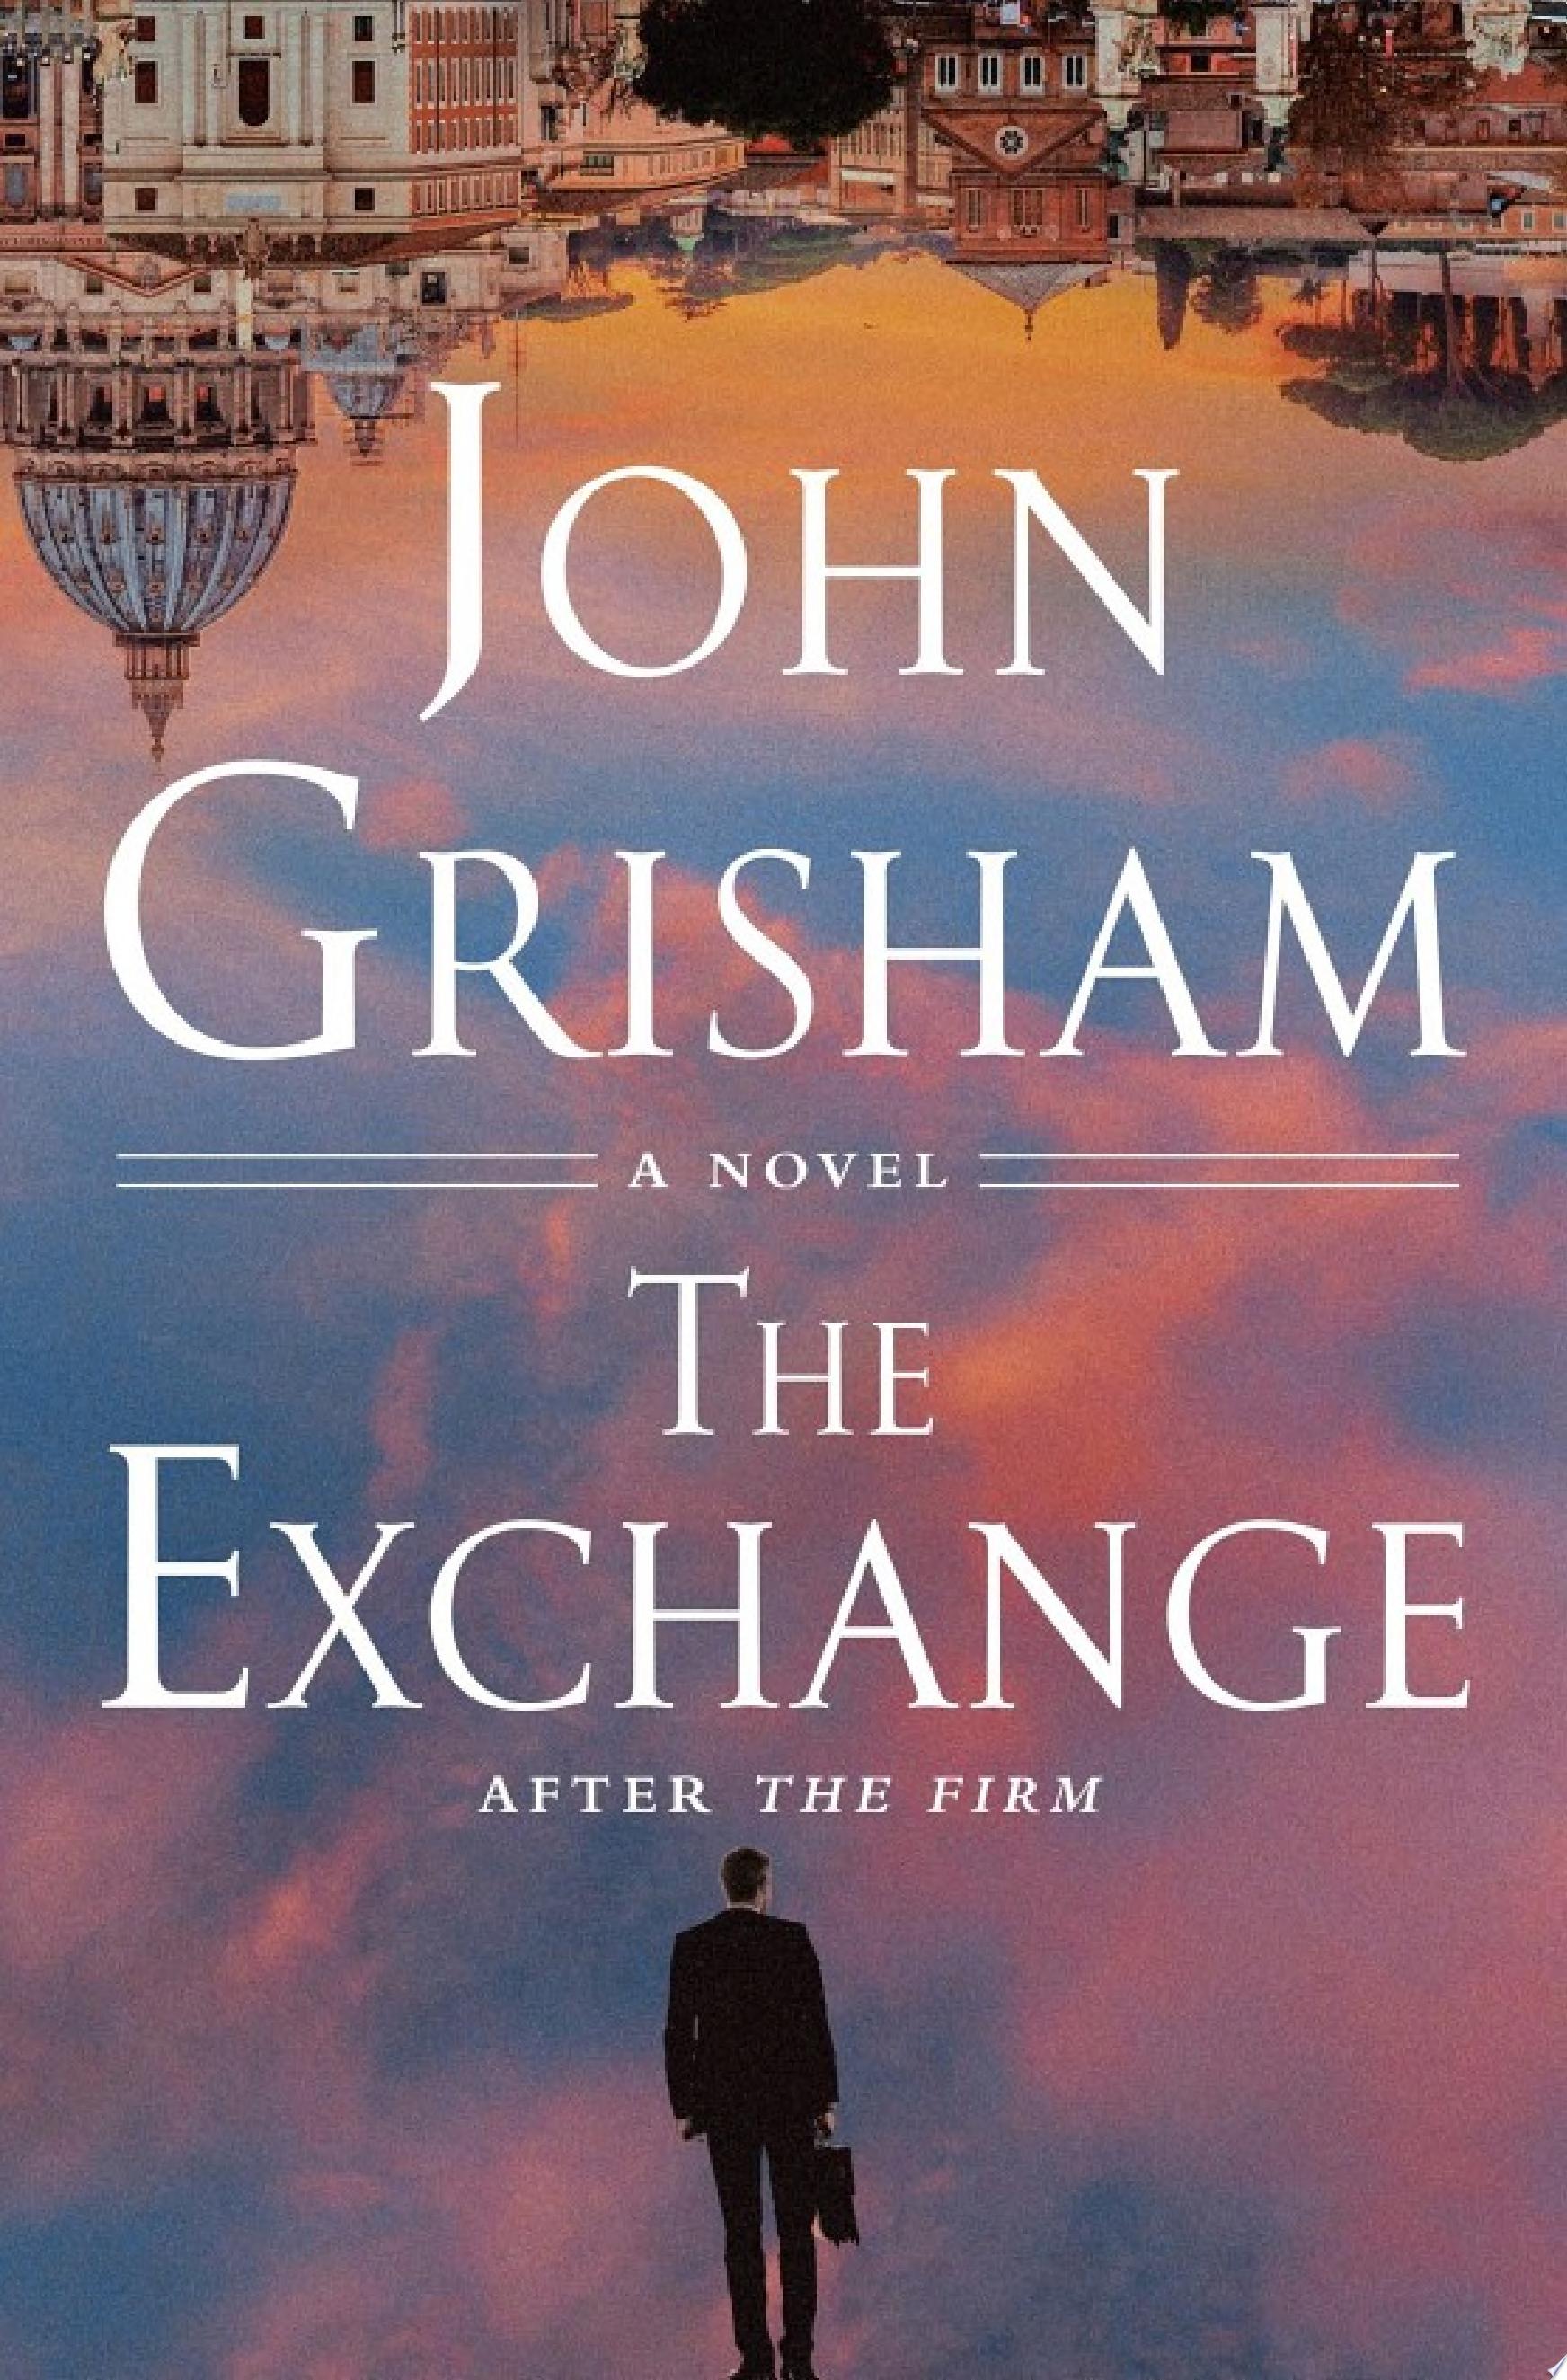 Image for "The Exchange"